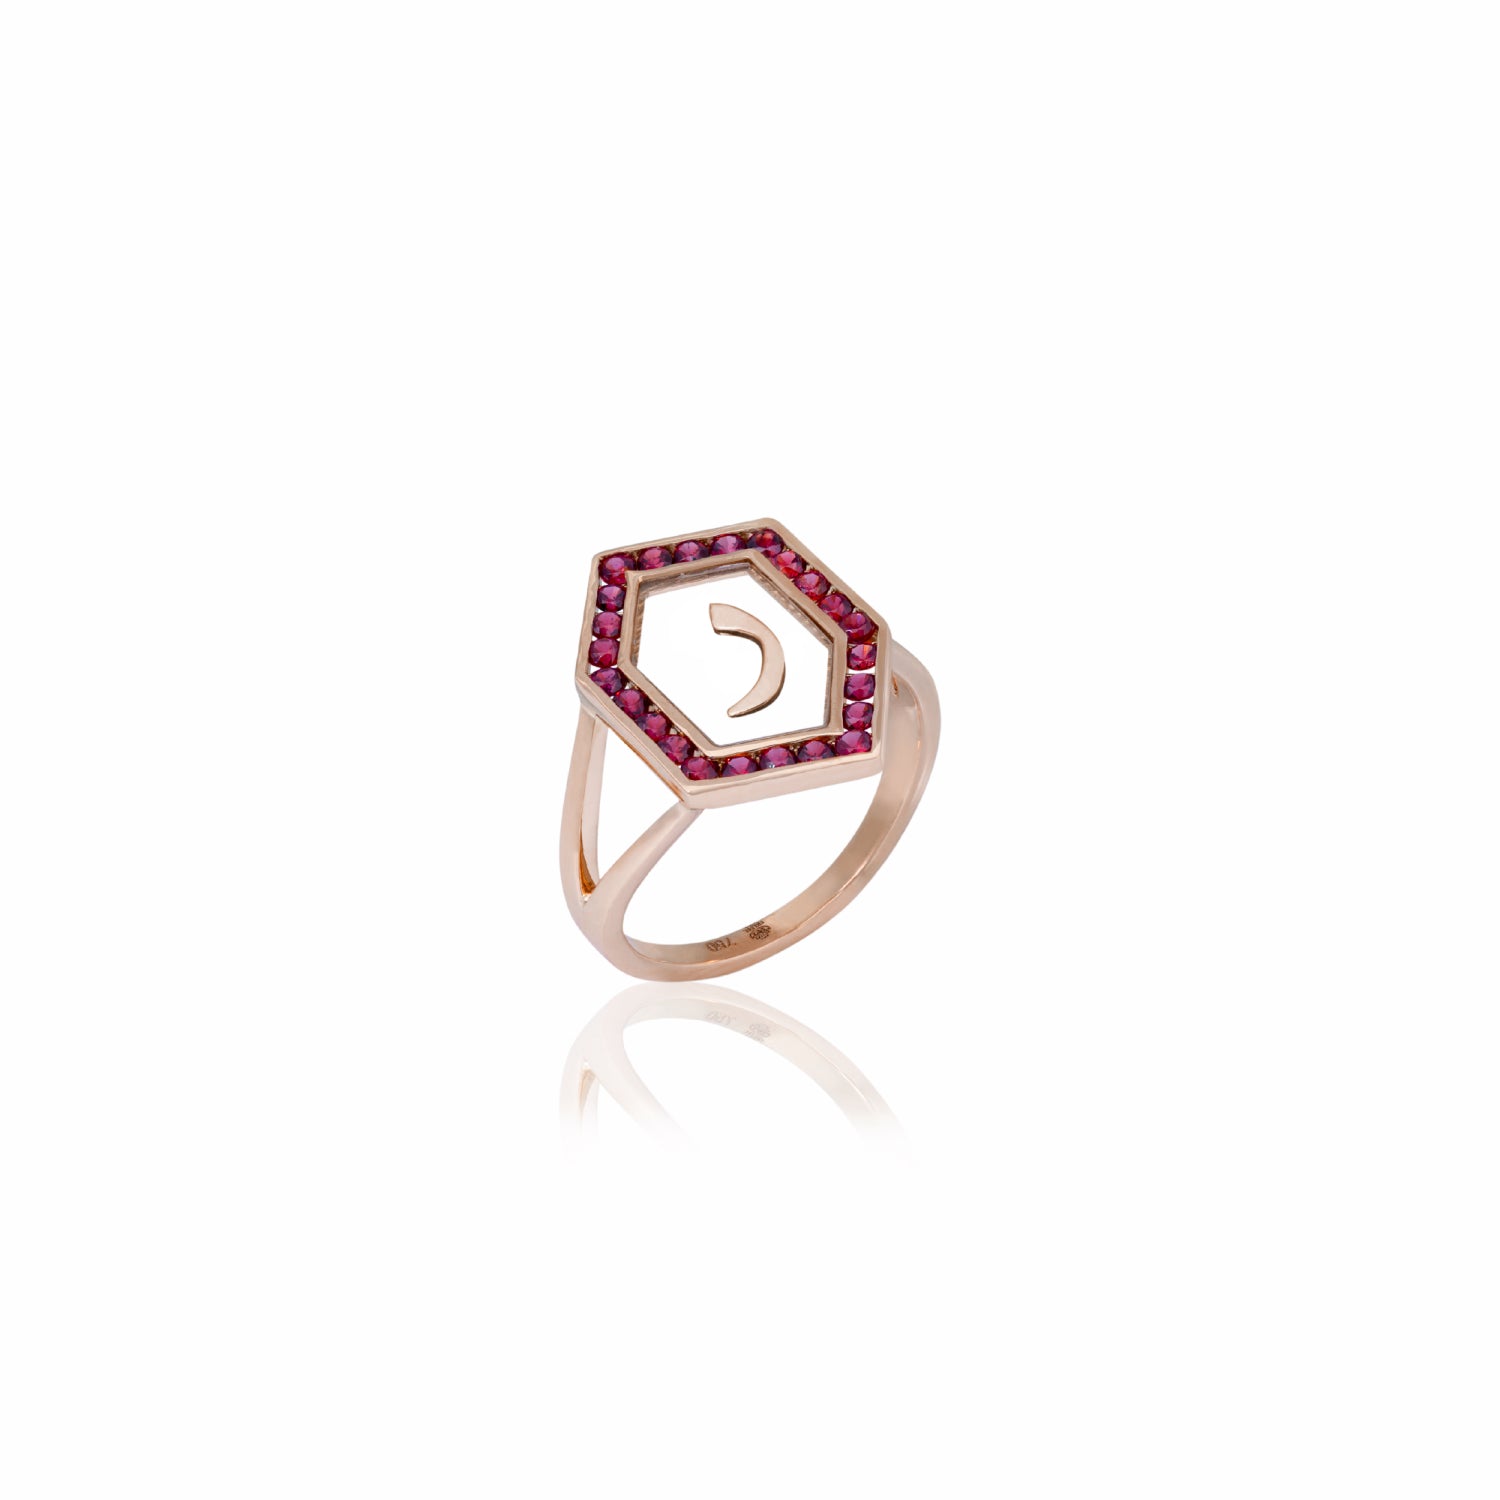 Qamoos 1.0 Letter ر Ruby Ring in Rose Gold